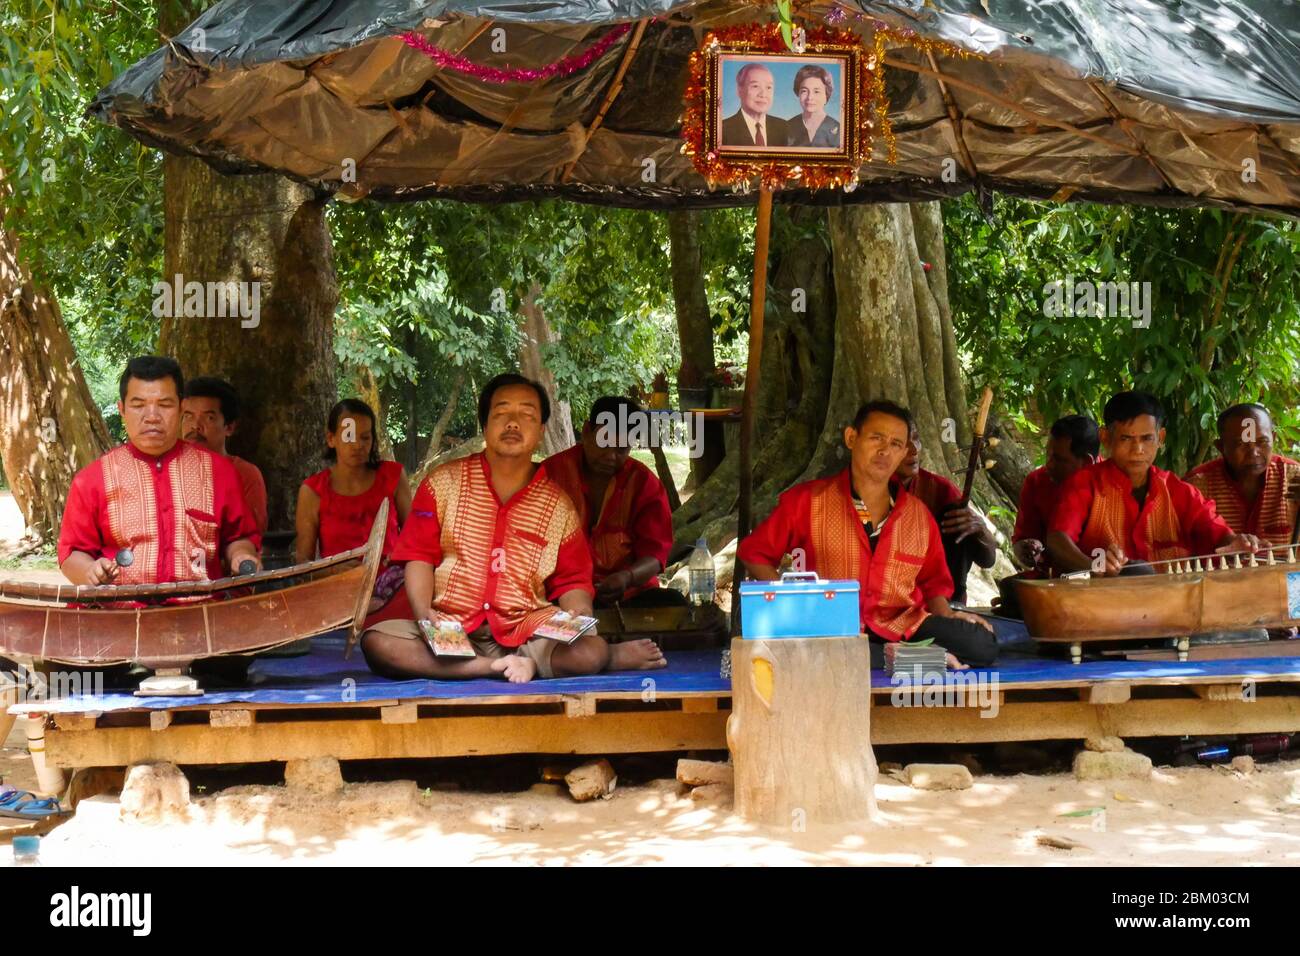 A musical group made up of victims of the anti-personnel mine (you can see a photo of the kings of cambodia) Angkor temples- Cambodia Stock Photo